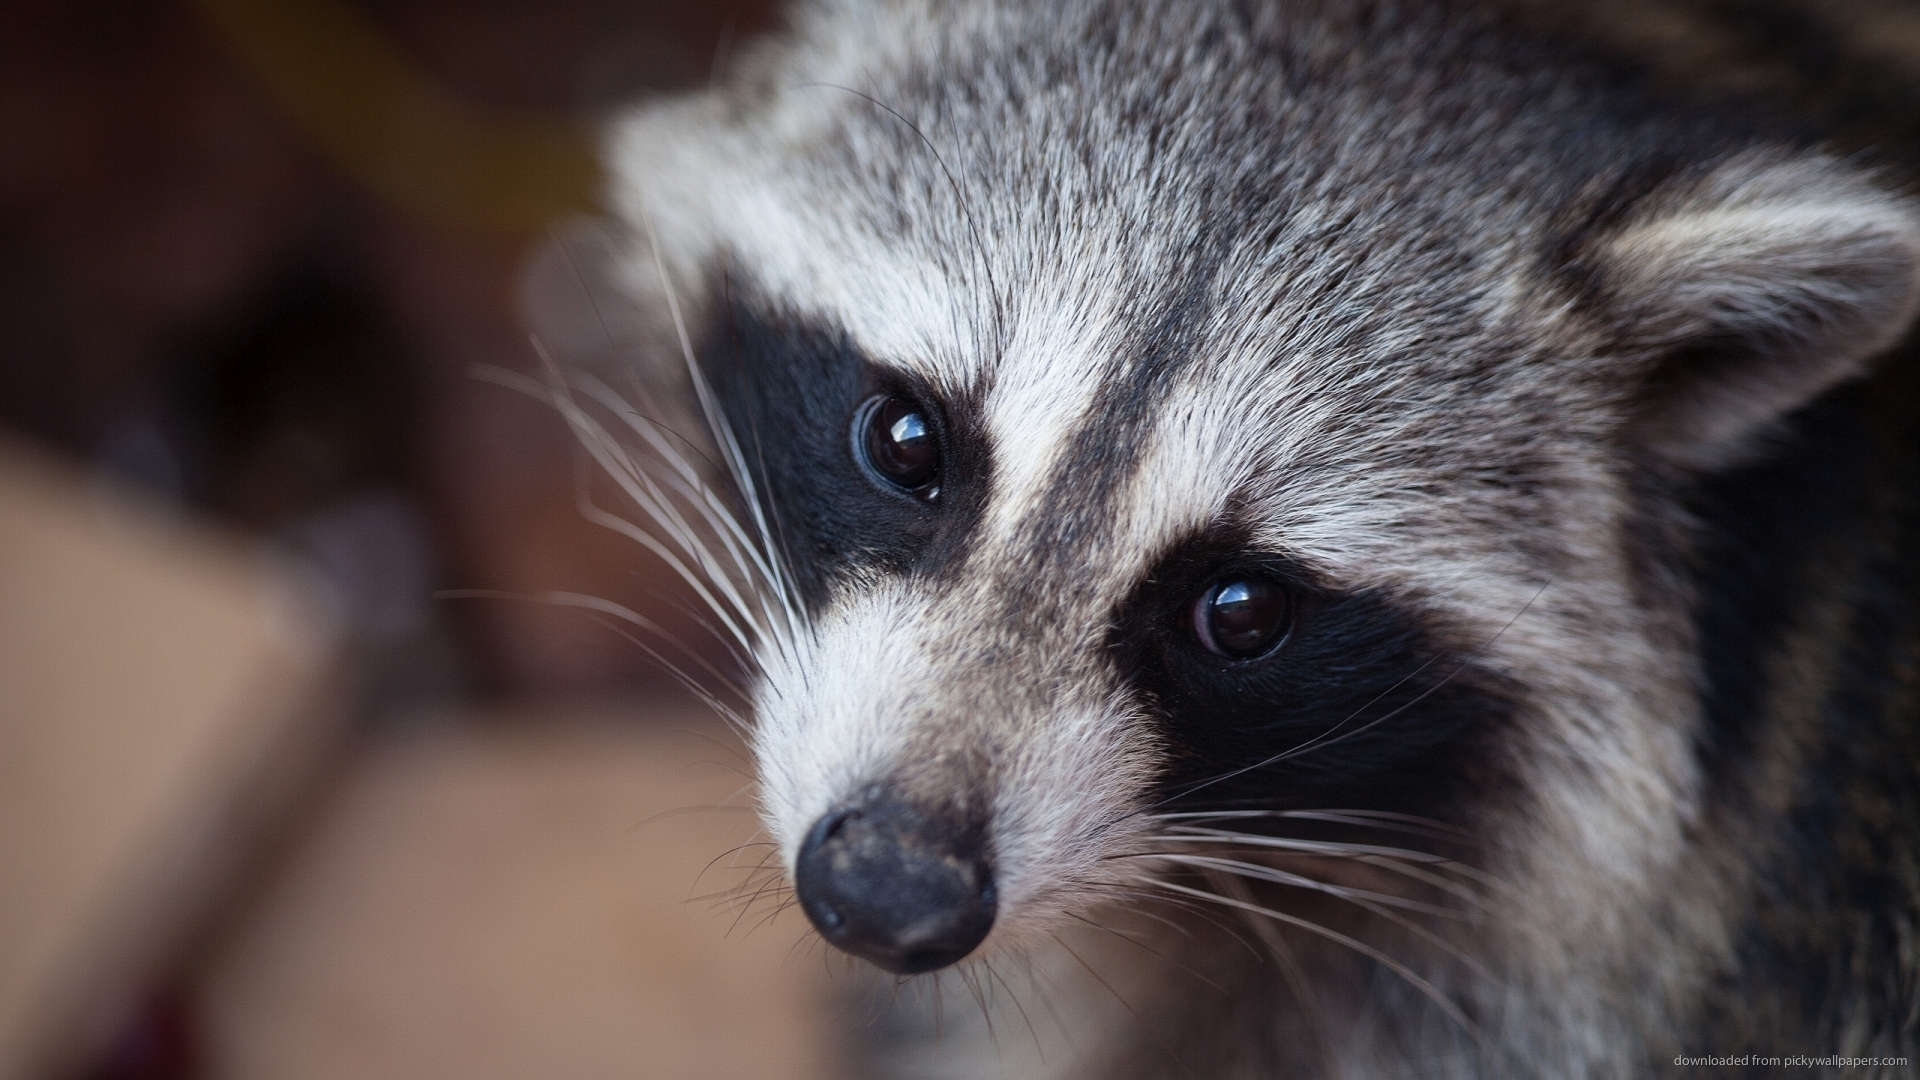 iPad Raccoon Animal Up Close Wallpaper Screensaver For Kindle3 And Dx